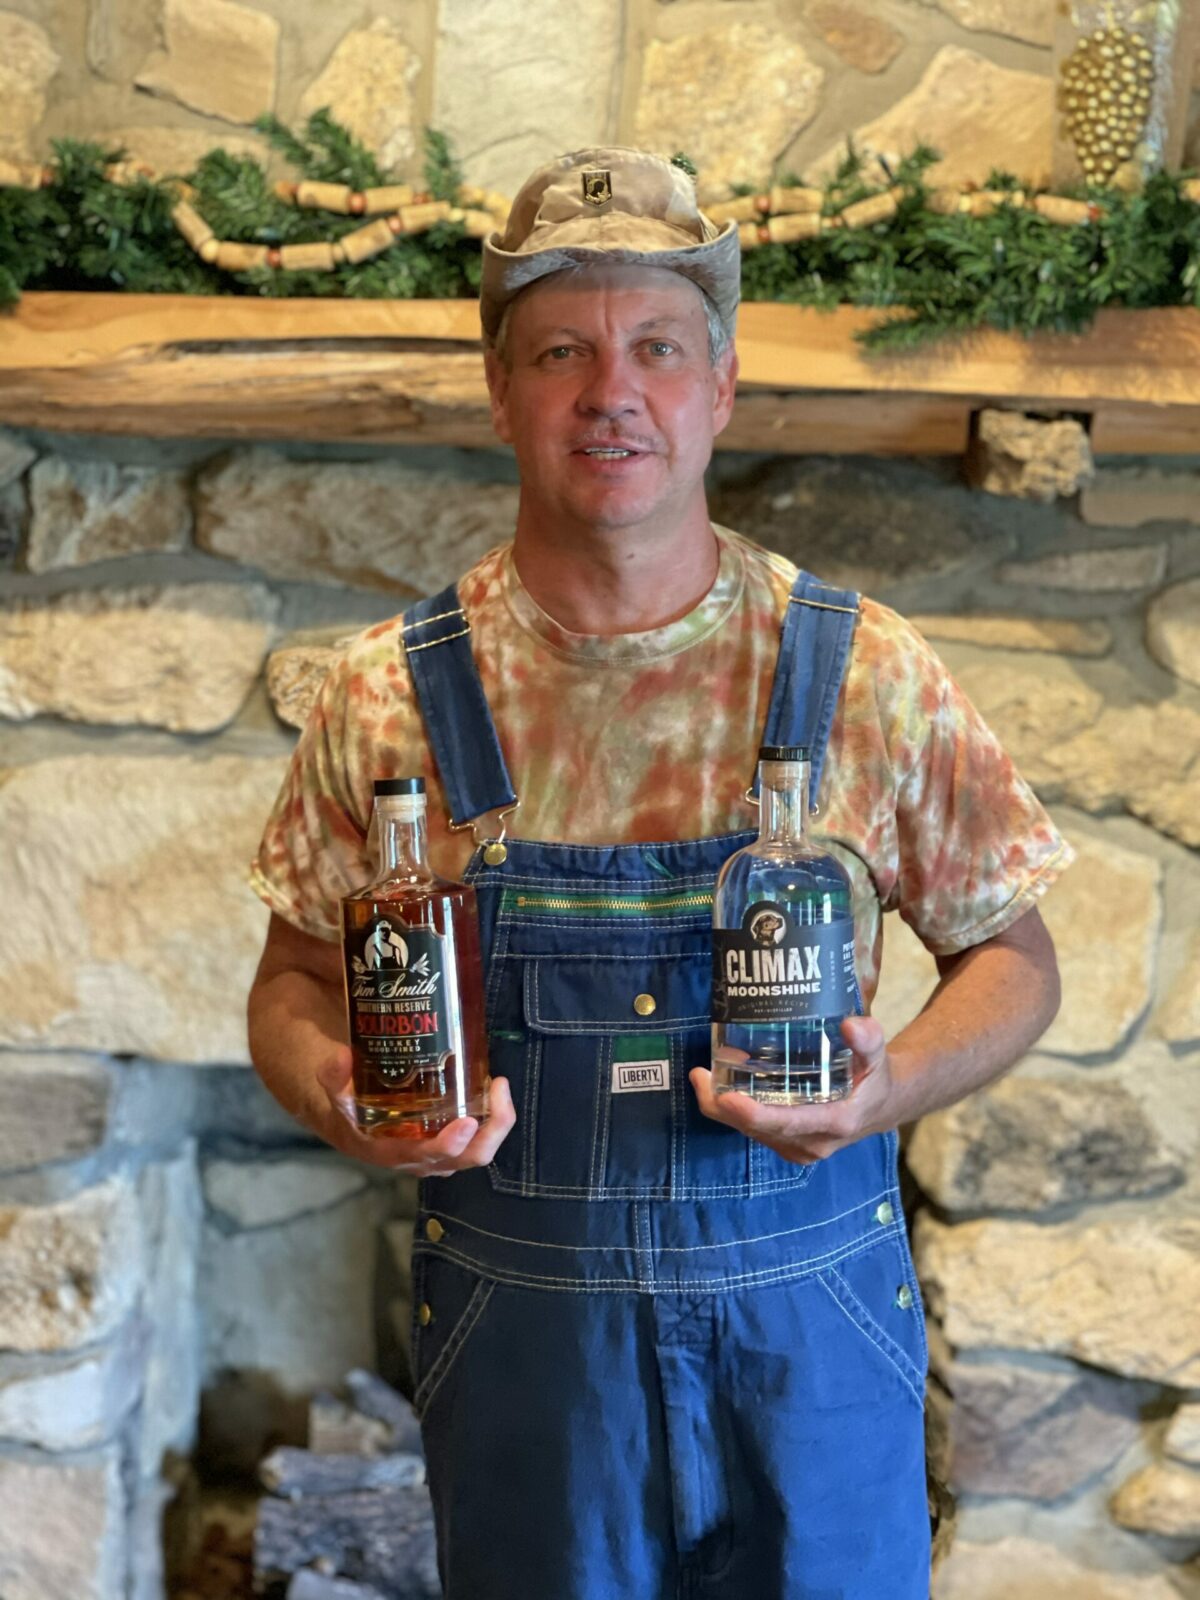 Tim Smith - Original Discovery Moonshiner - The Bourbon Road